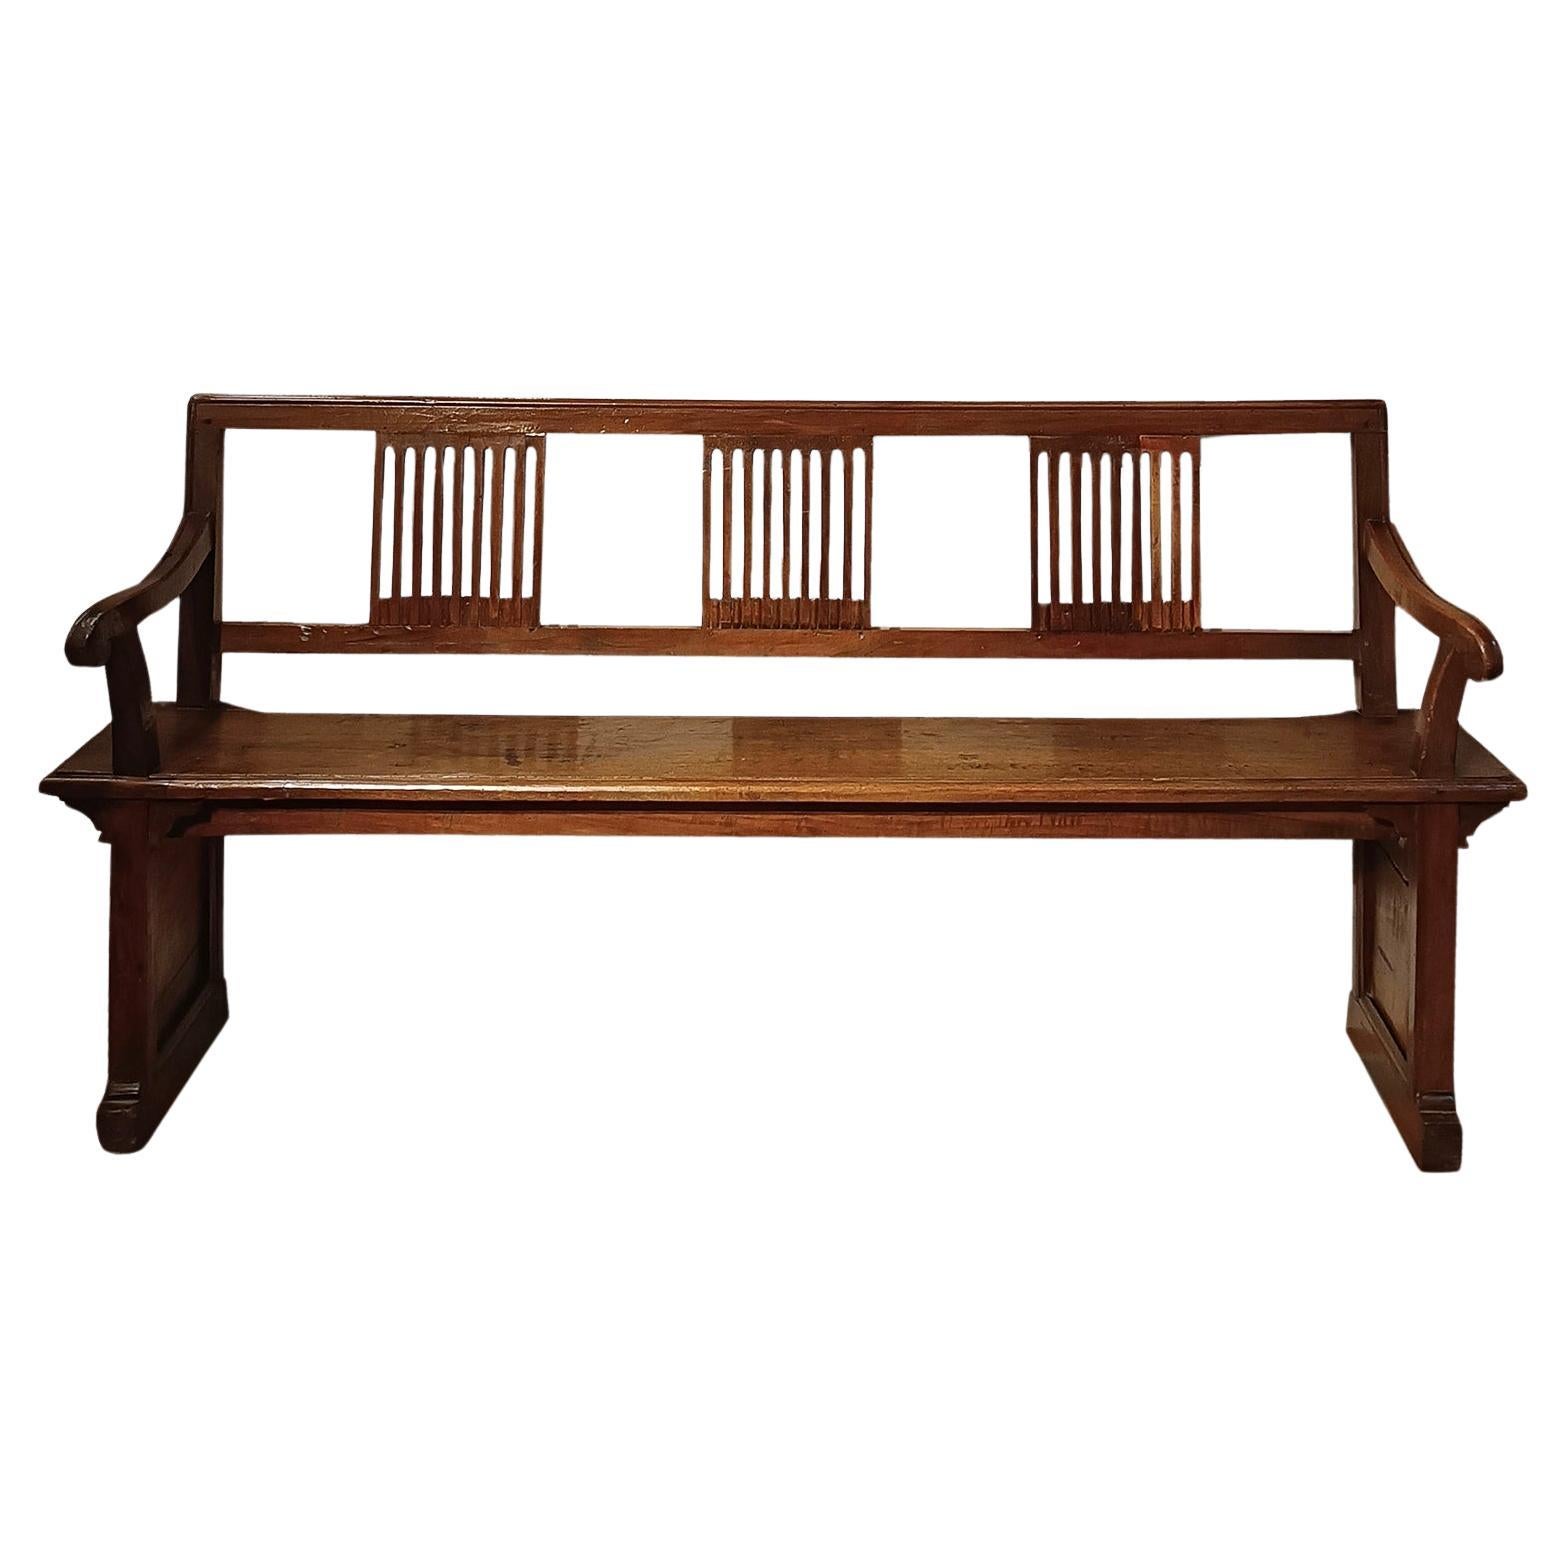 END OF THE 17th CENTURY WALNUT ENTRANCE BENCH  For Sale